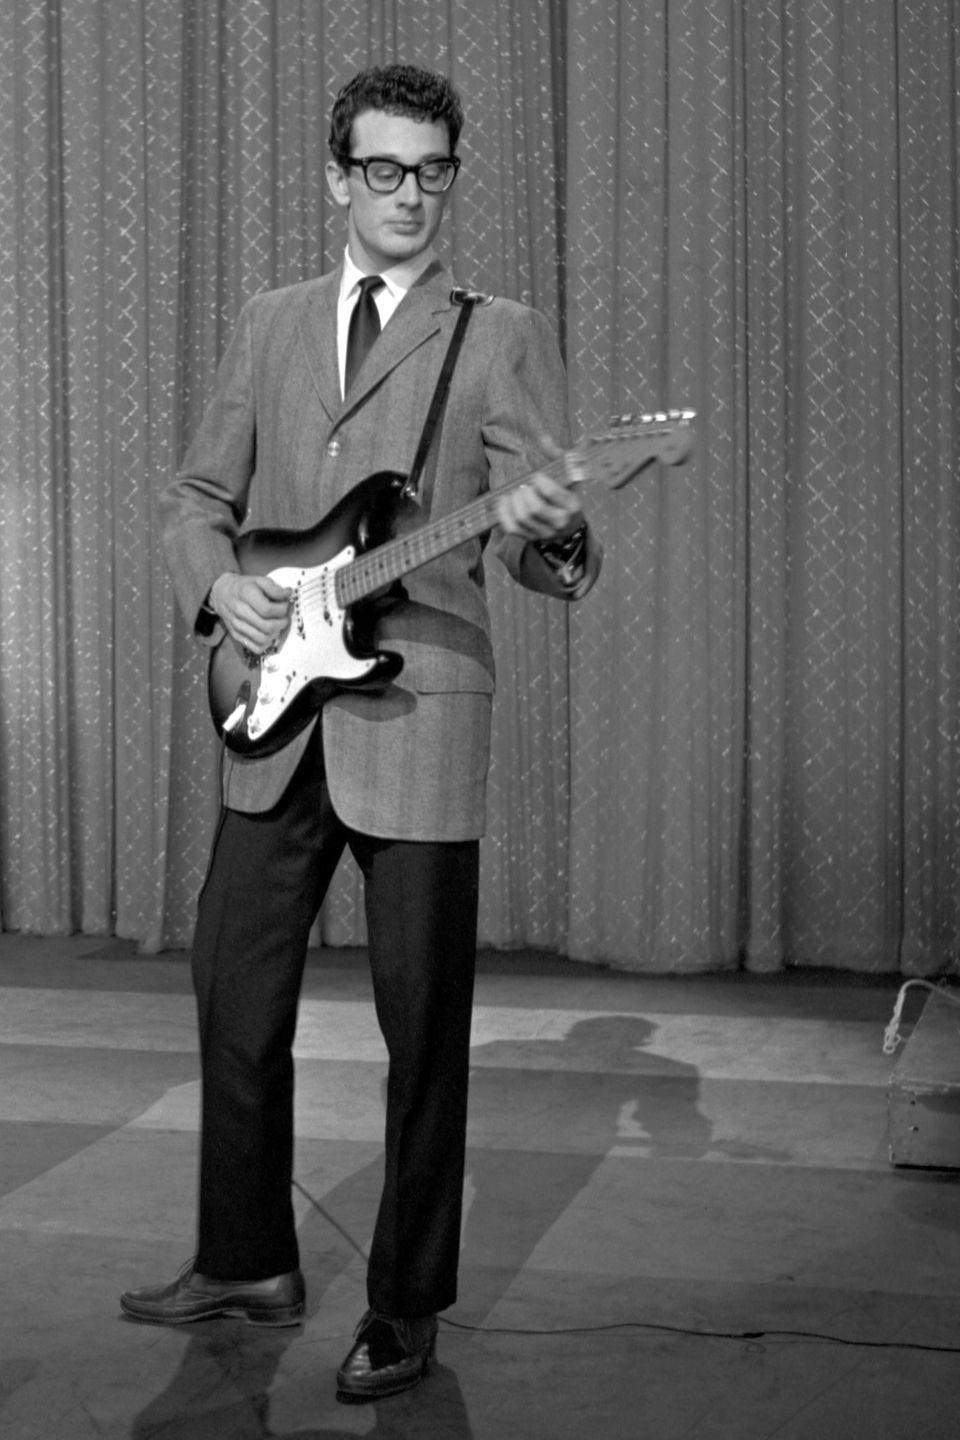 buddy holly plays electric guitar while standing in front of a diamond patterned curtain